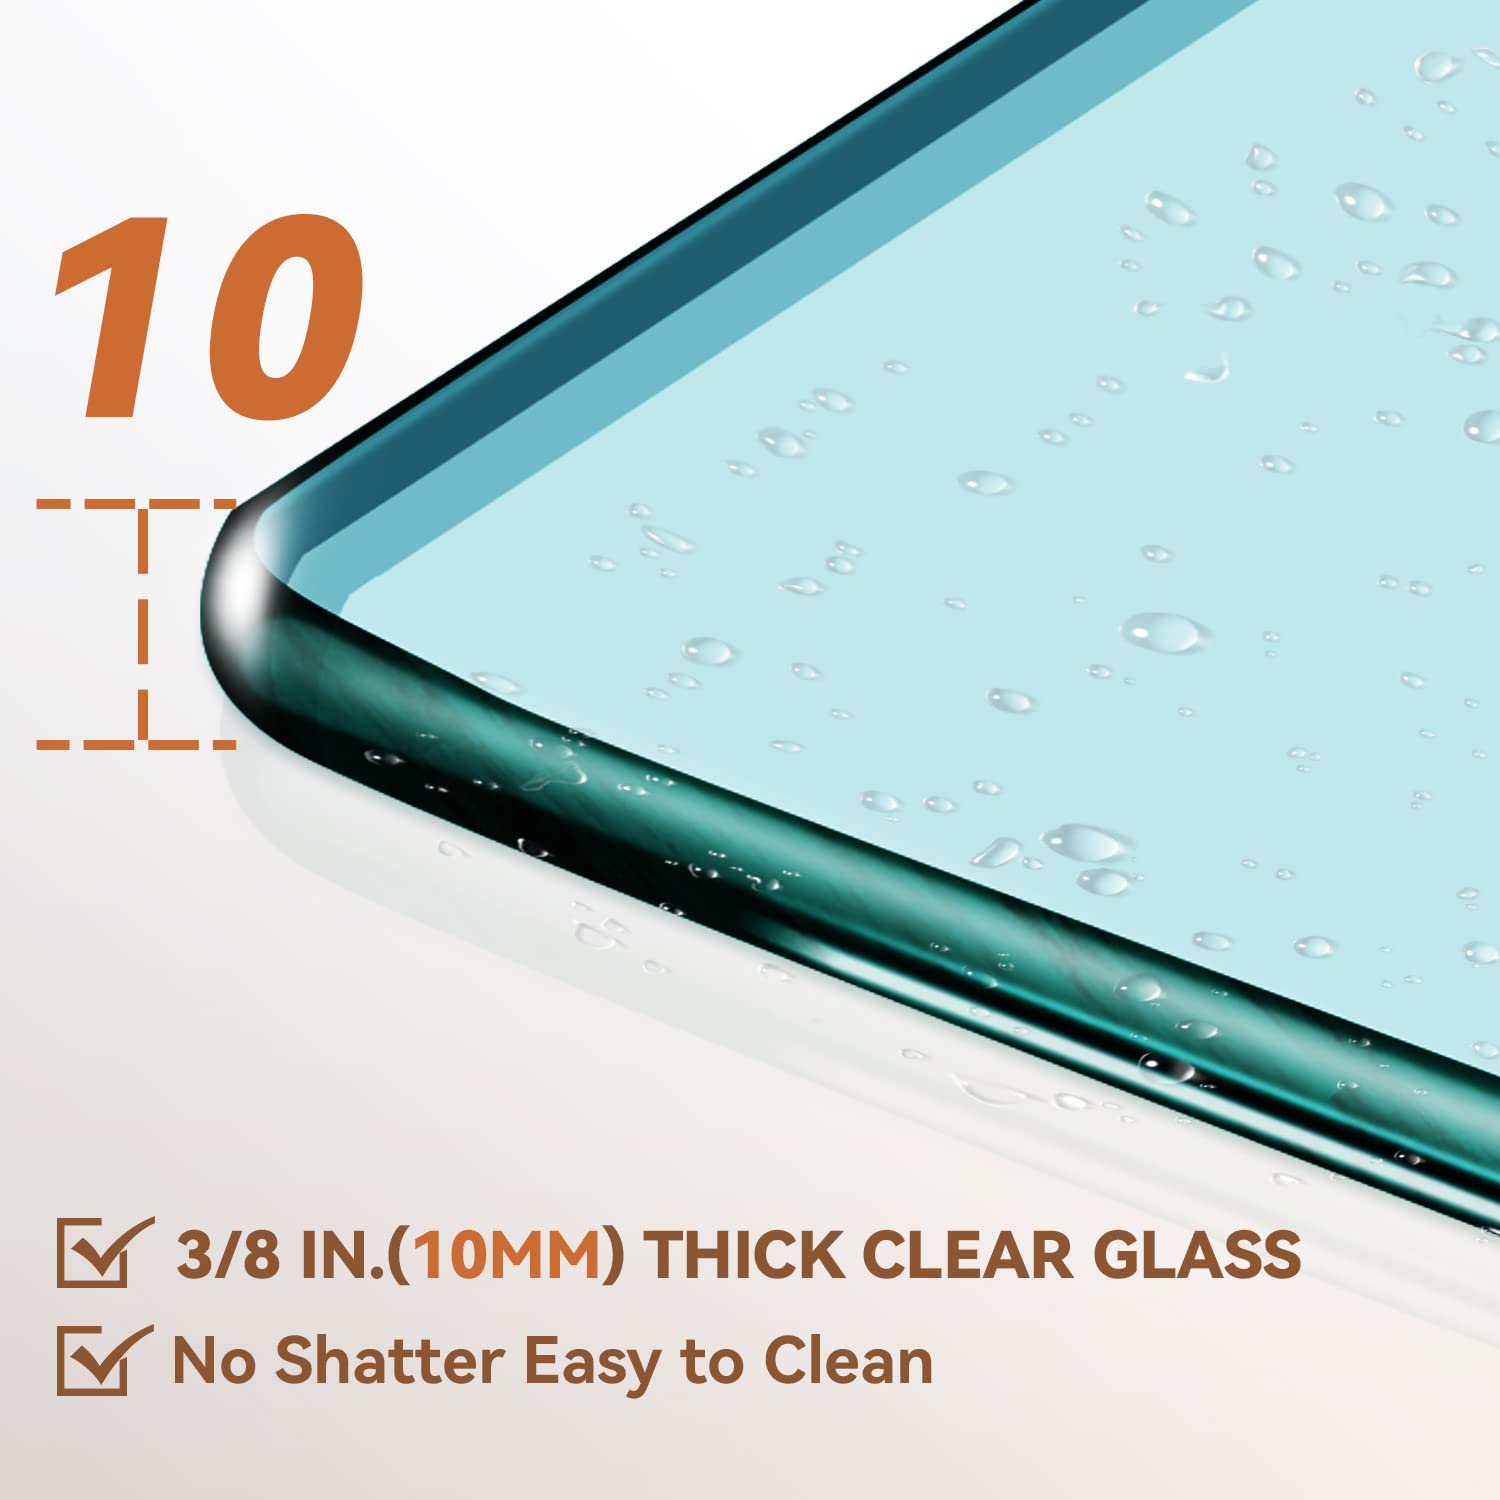 ANSI Z97.1 certified 3/8" (10mm) thick tempered glass increases impact resistance and makes it more unbreakable, strong, and secure than other glass